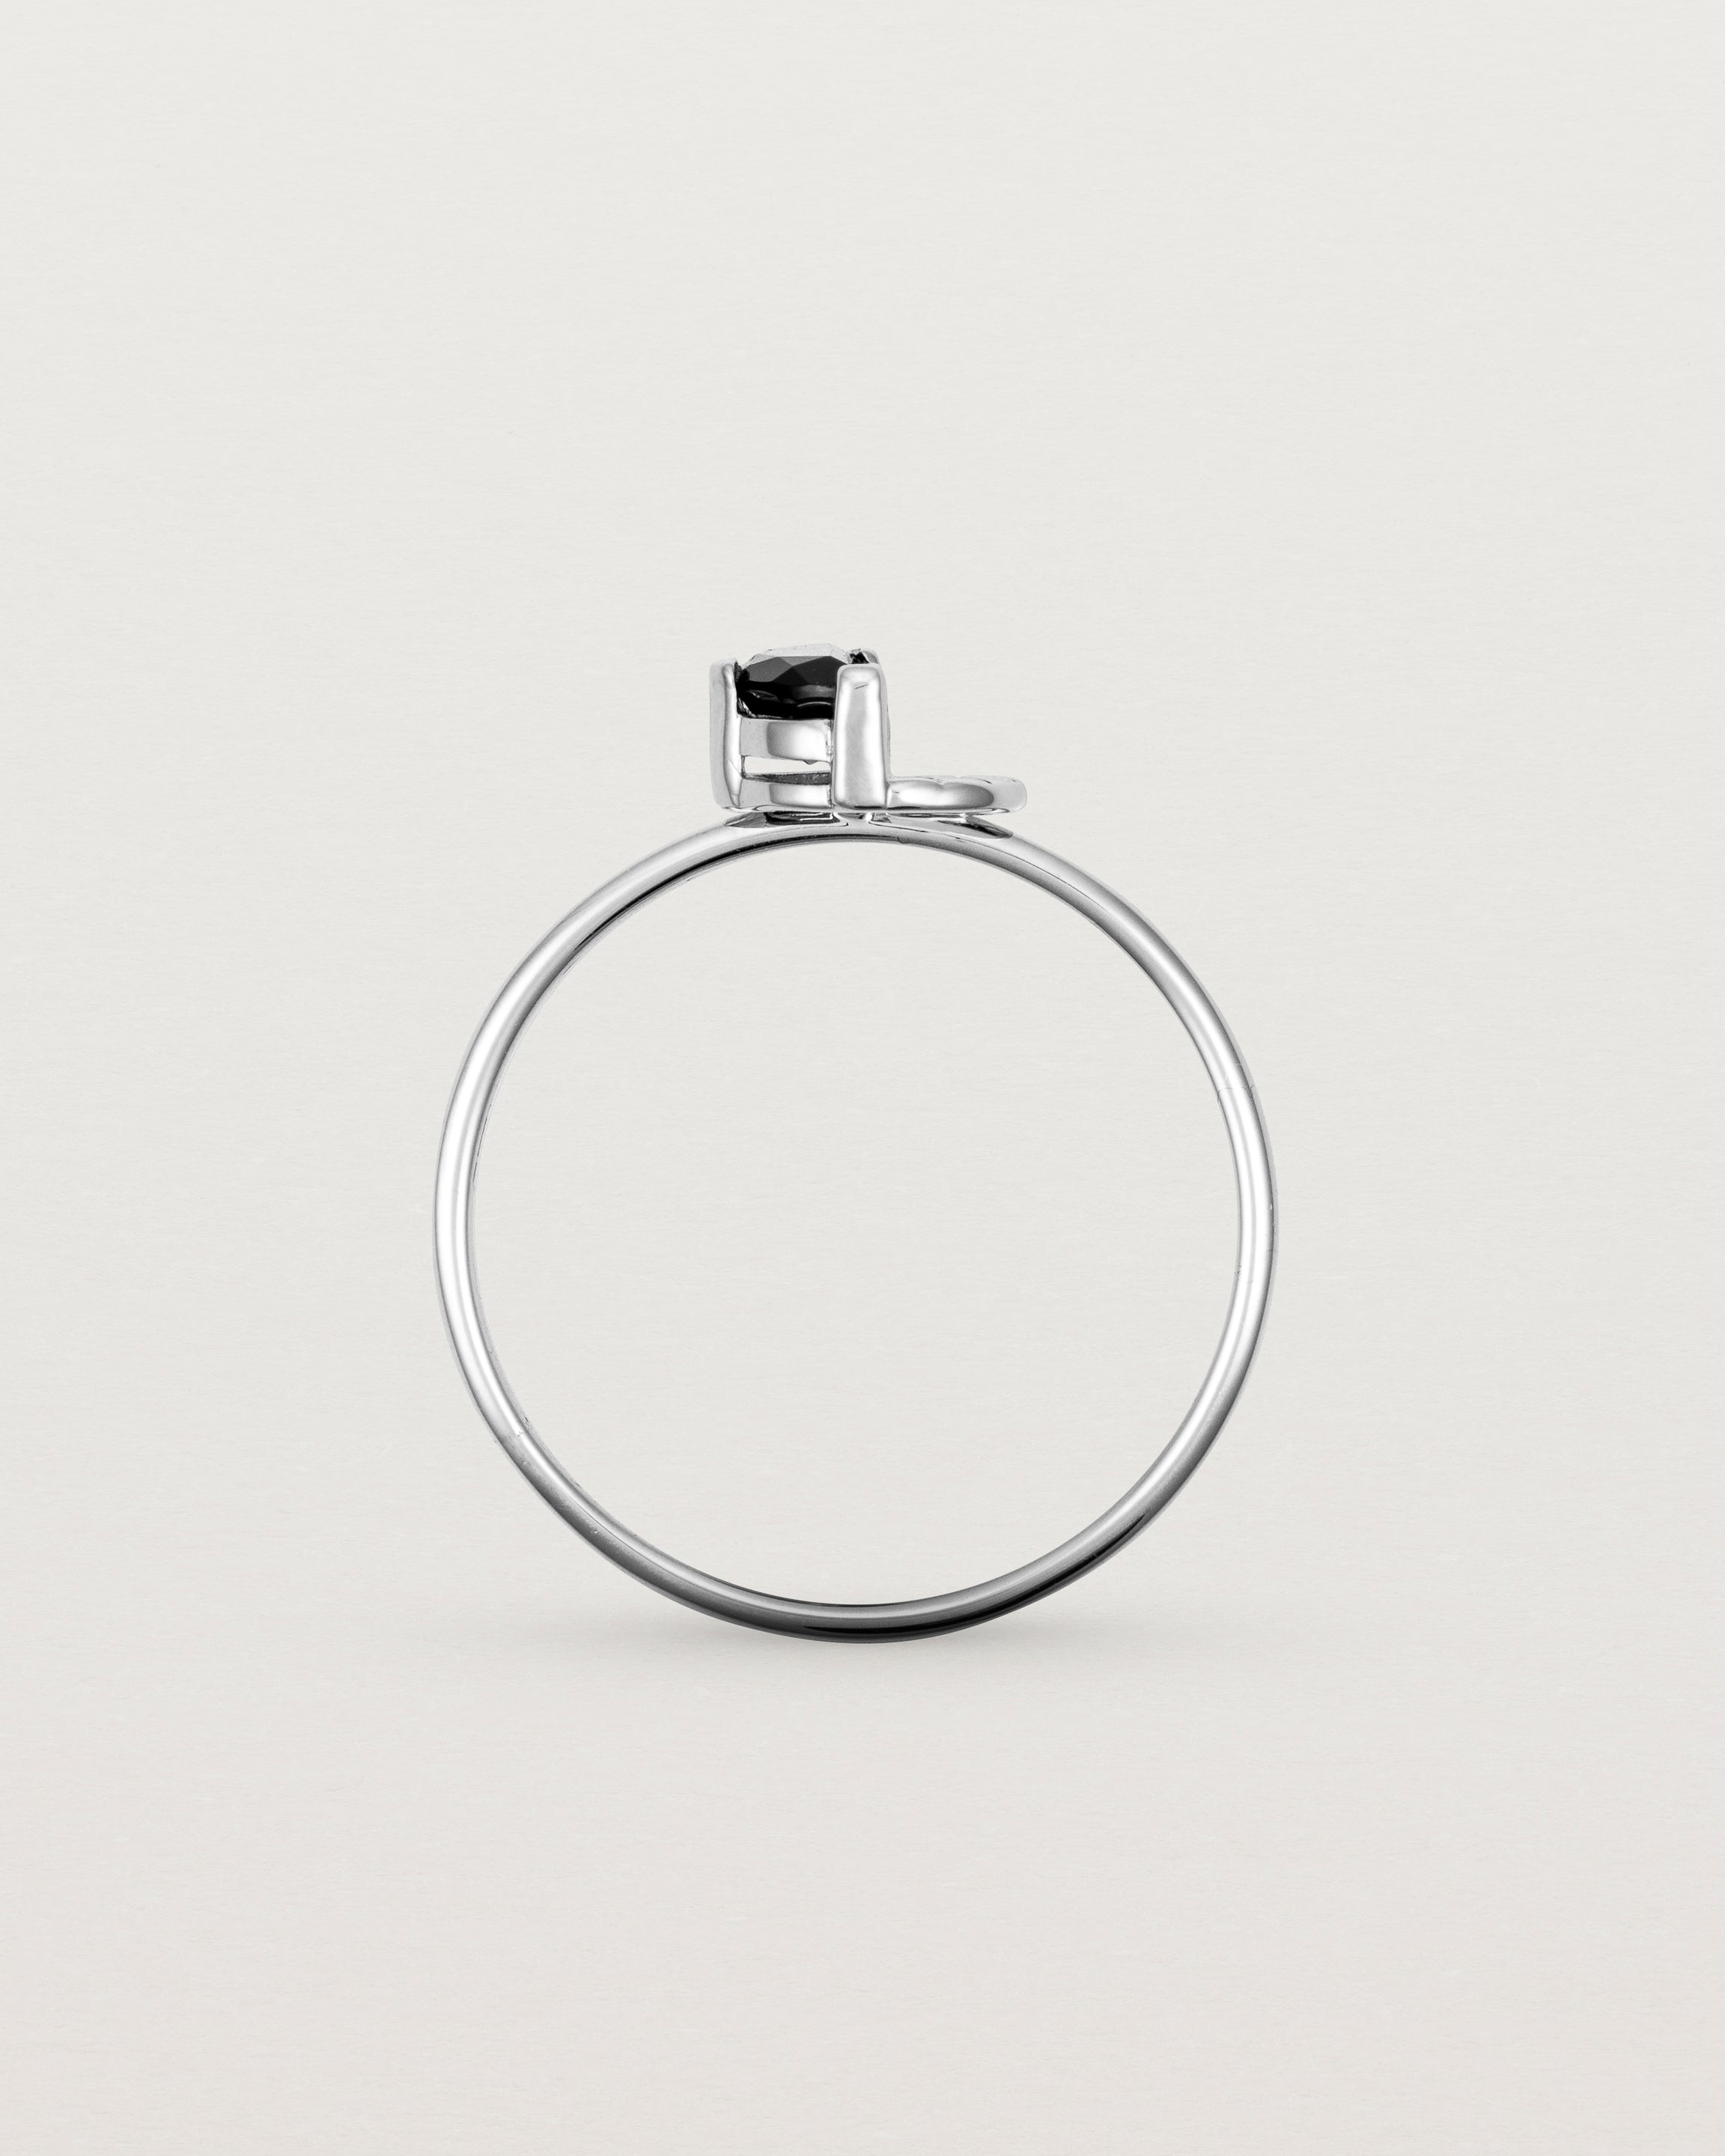 Standing view of the Jia Stone Ring | Black Spinel in Sterling Silver.